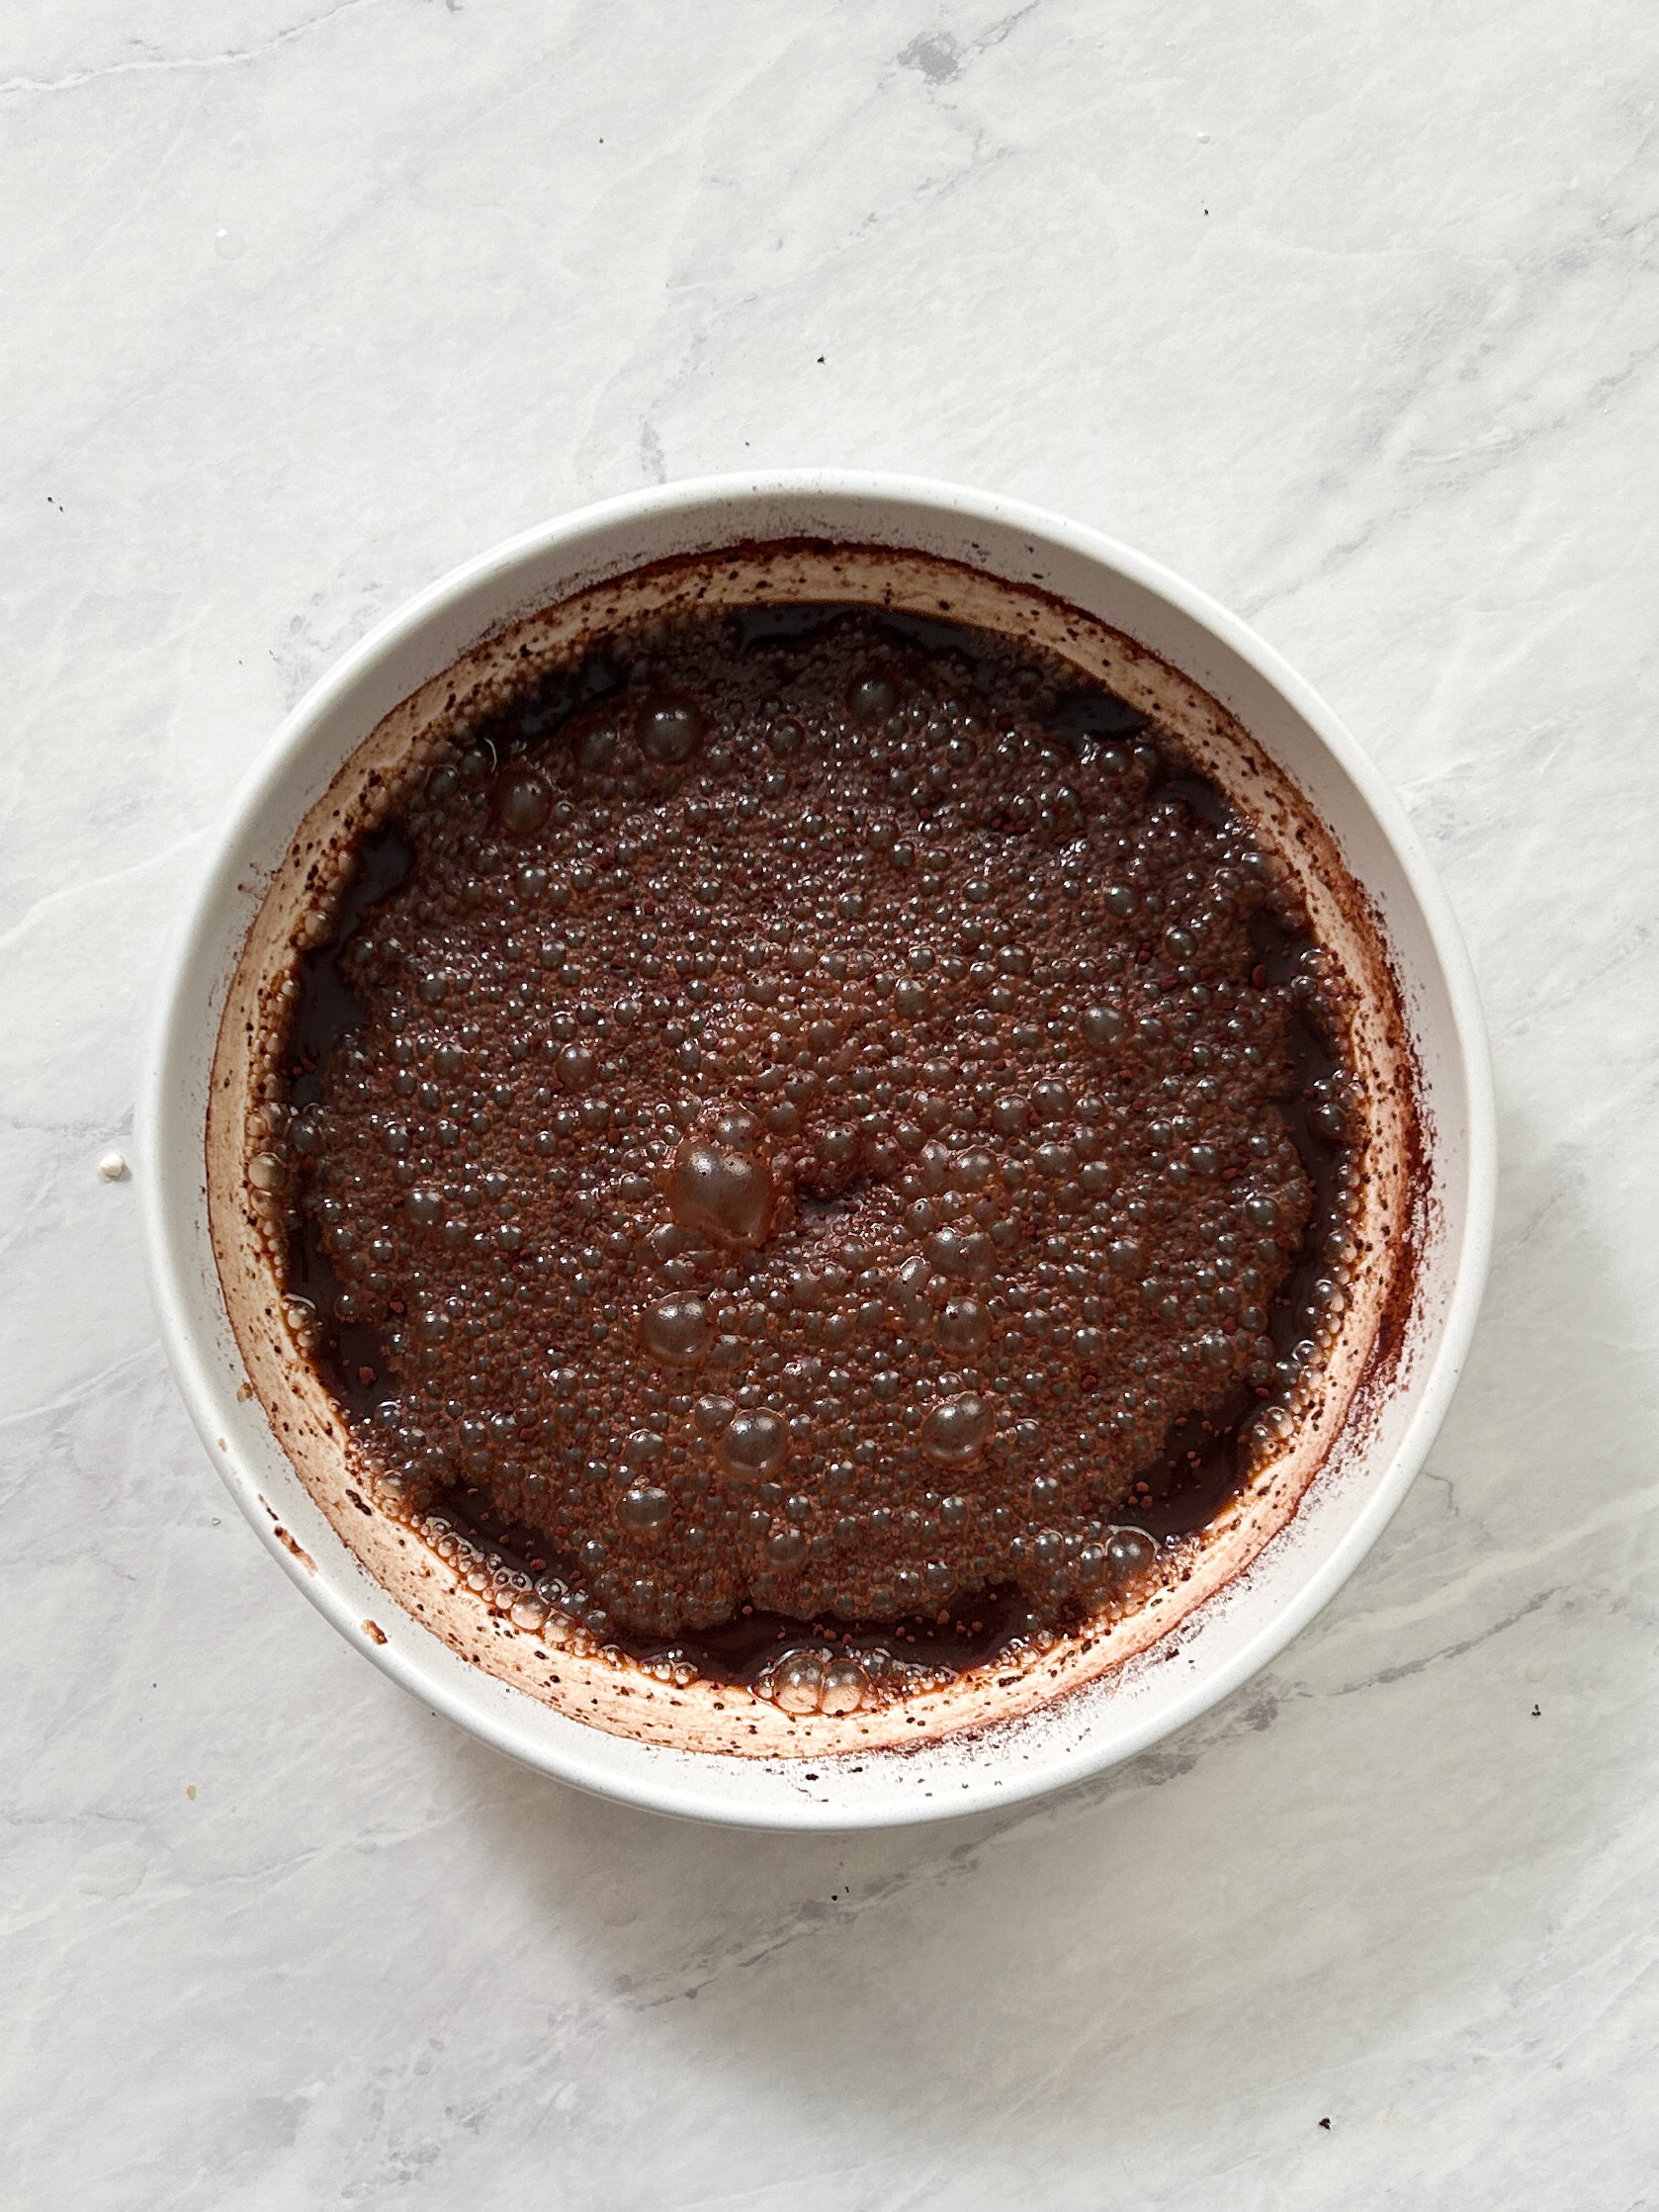 cocoa powder mixed with espresso in a large deep plate